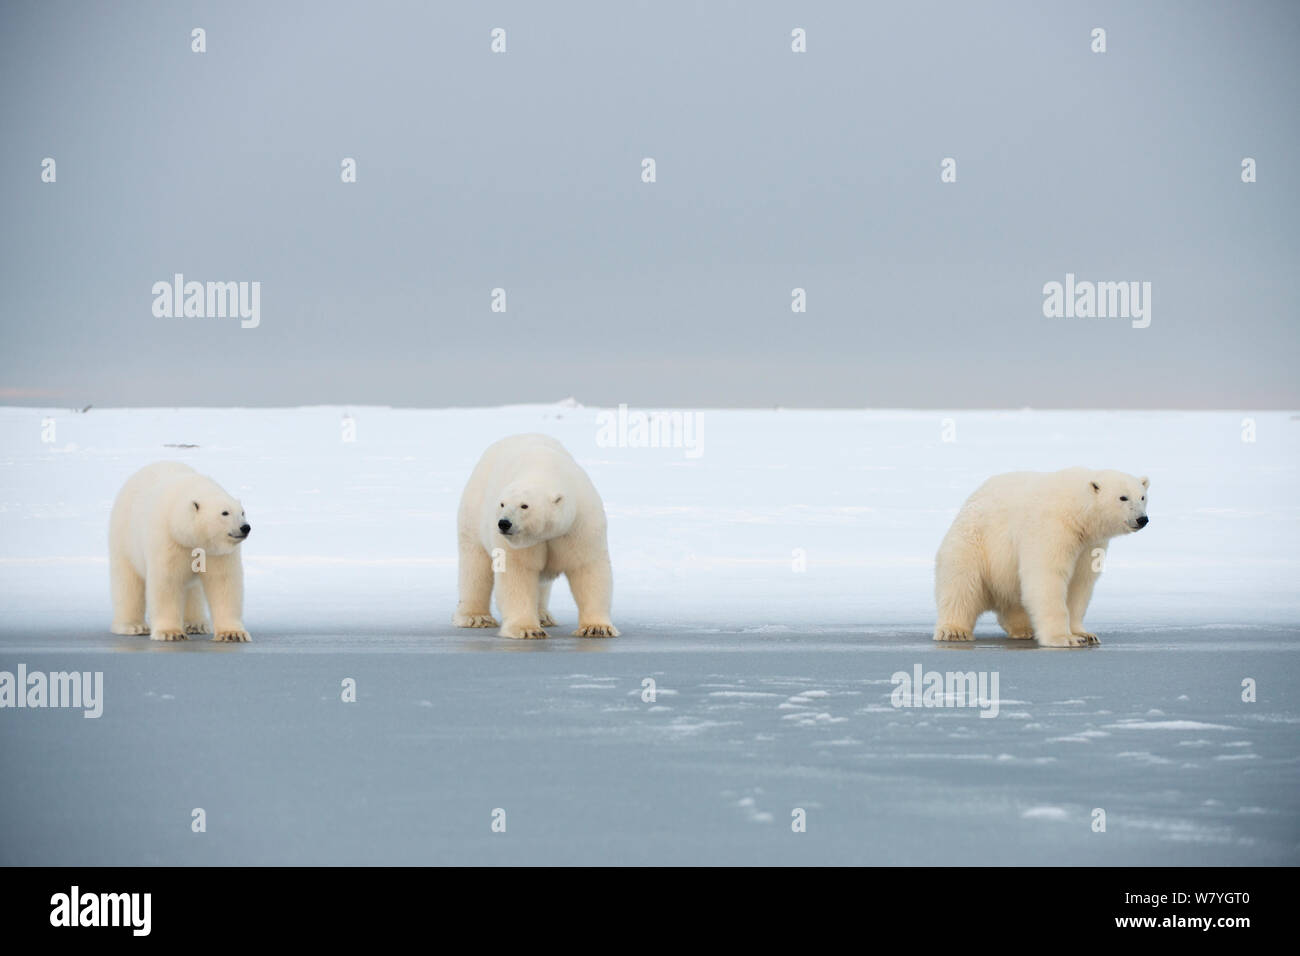 Polar bear (Ursus maritimus) mother with two juveniles walking over newly forming pack ice during autumn freeze up, Beaufort Sea, off Arctic coast, Alaska Stock Photo